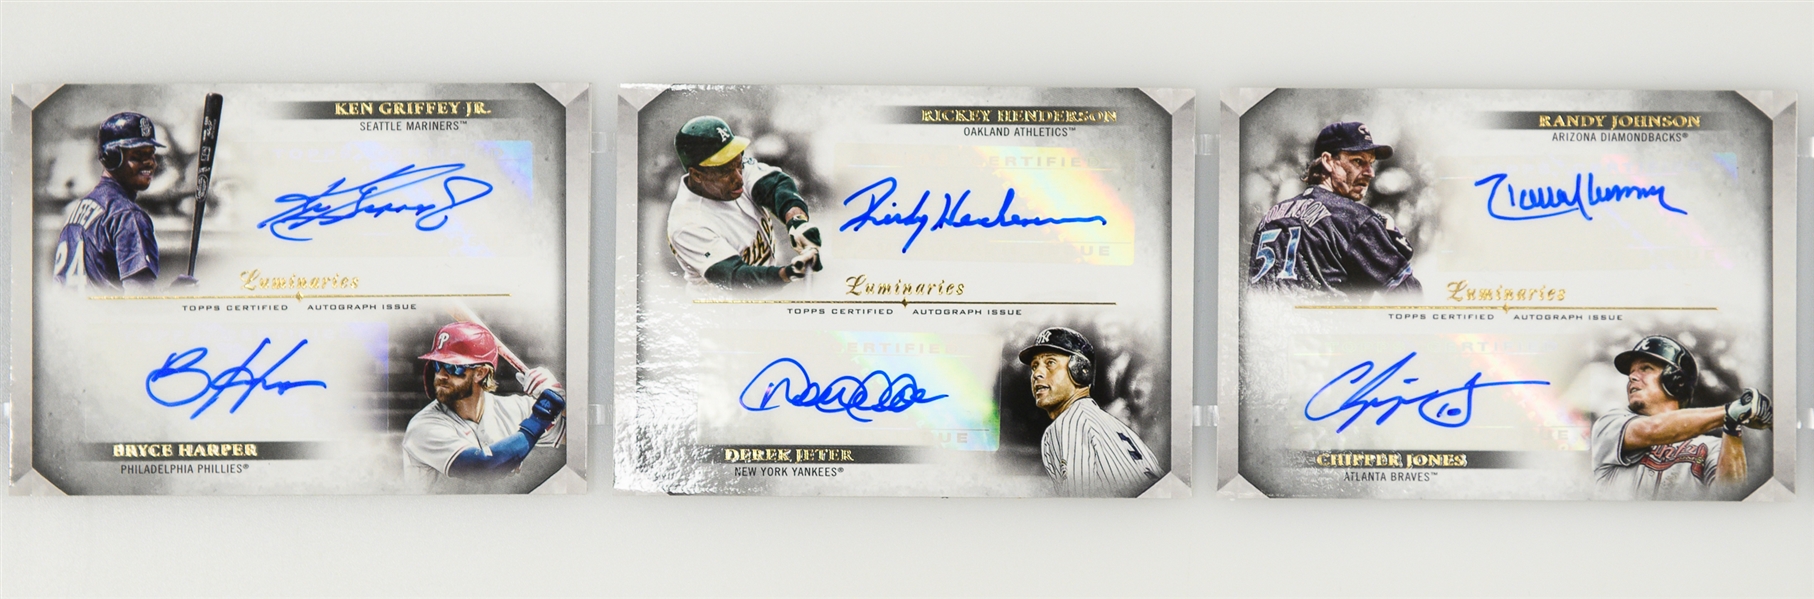 2021 Topps Luminaries 1/1 Booklet Card w. 30 Autographs Inc. Trout, Jeter, Griffey Jr., Ichiro , Pujols, Tatis, Yaz, Bench, Henderson, + Legends & HOFers - The Top Card in the Product!